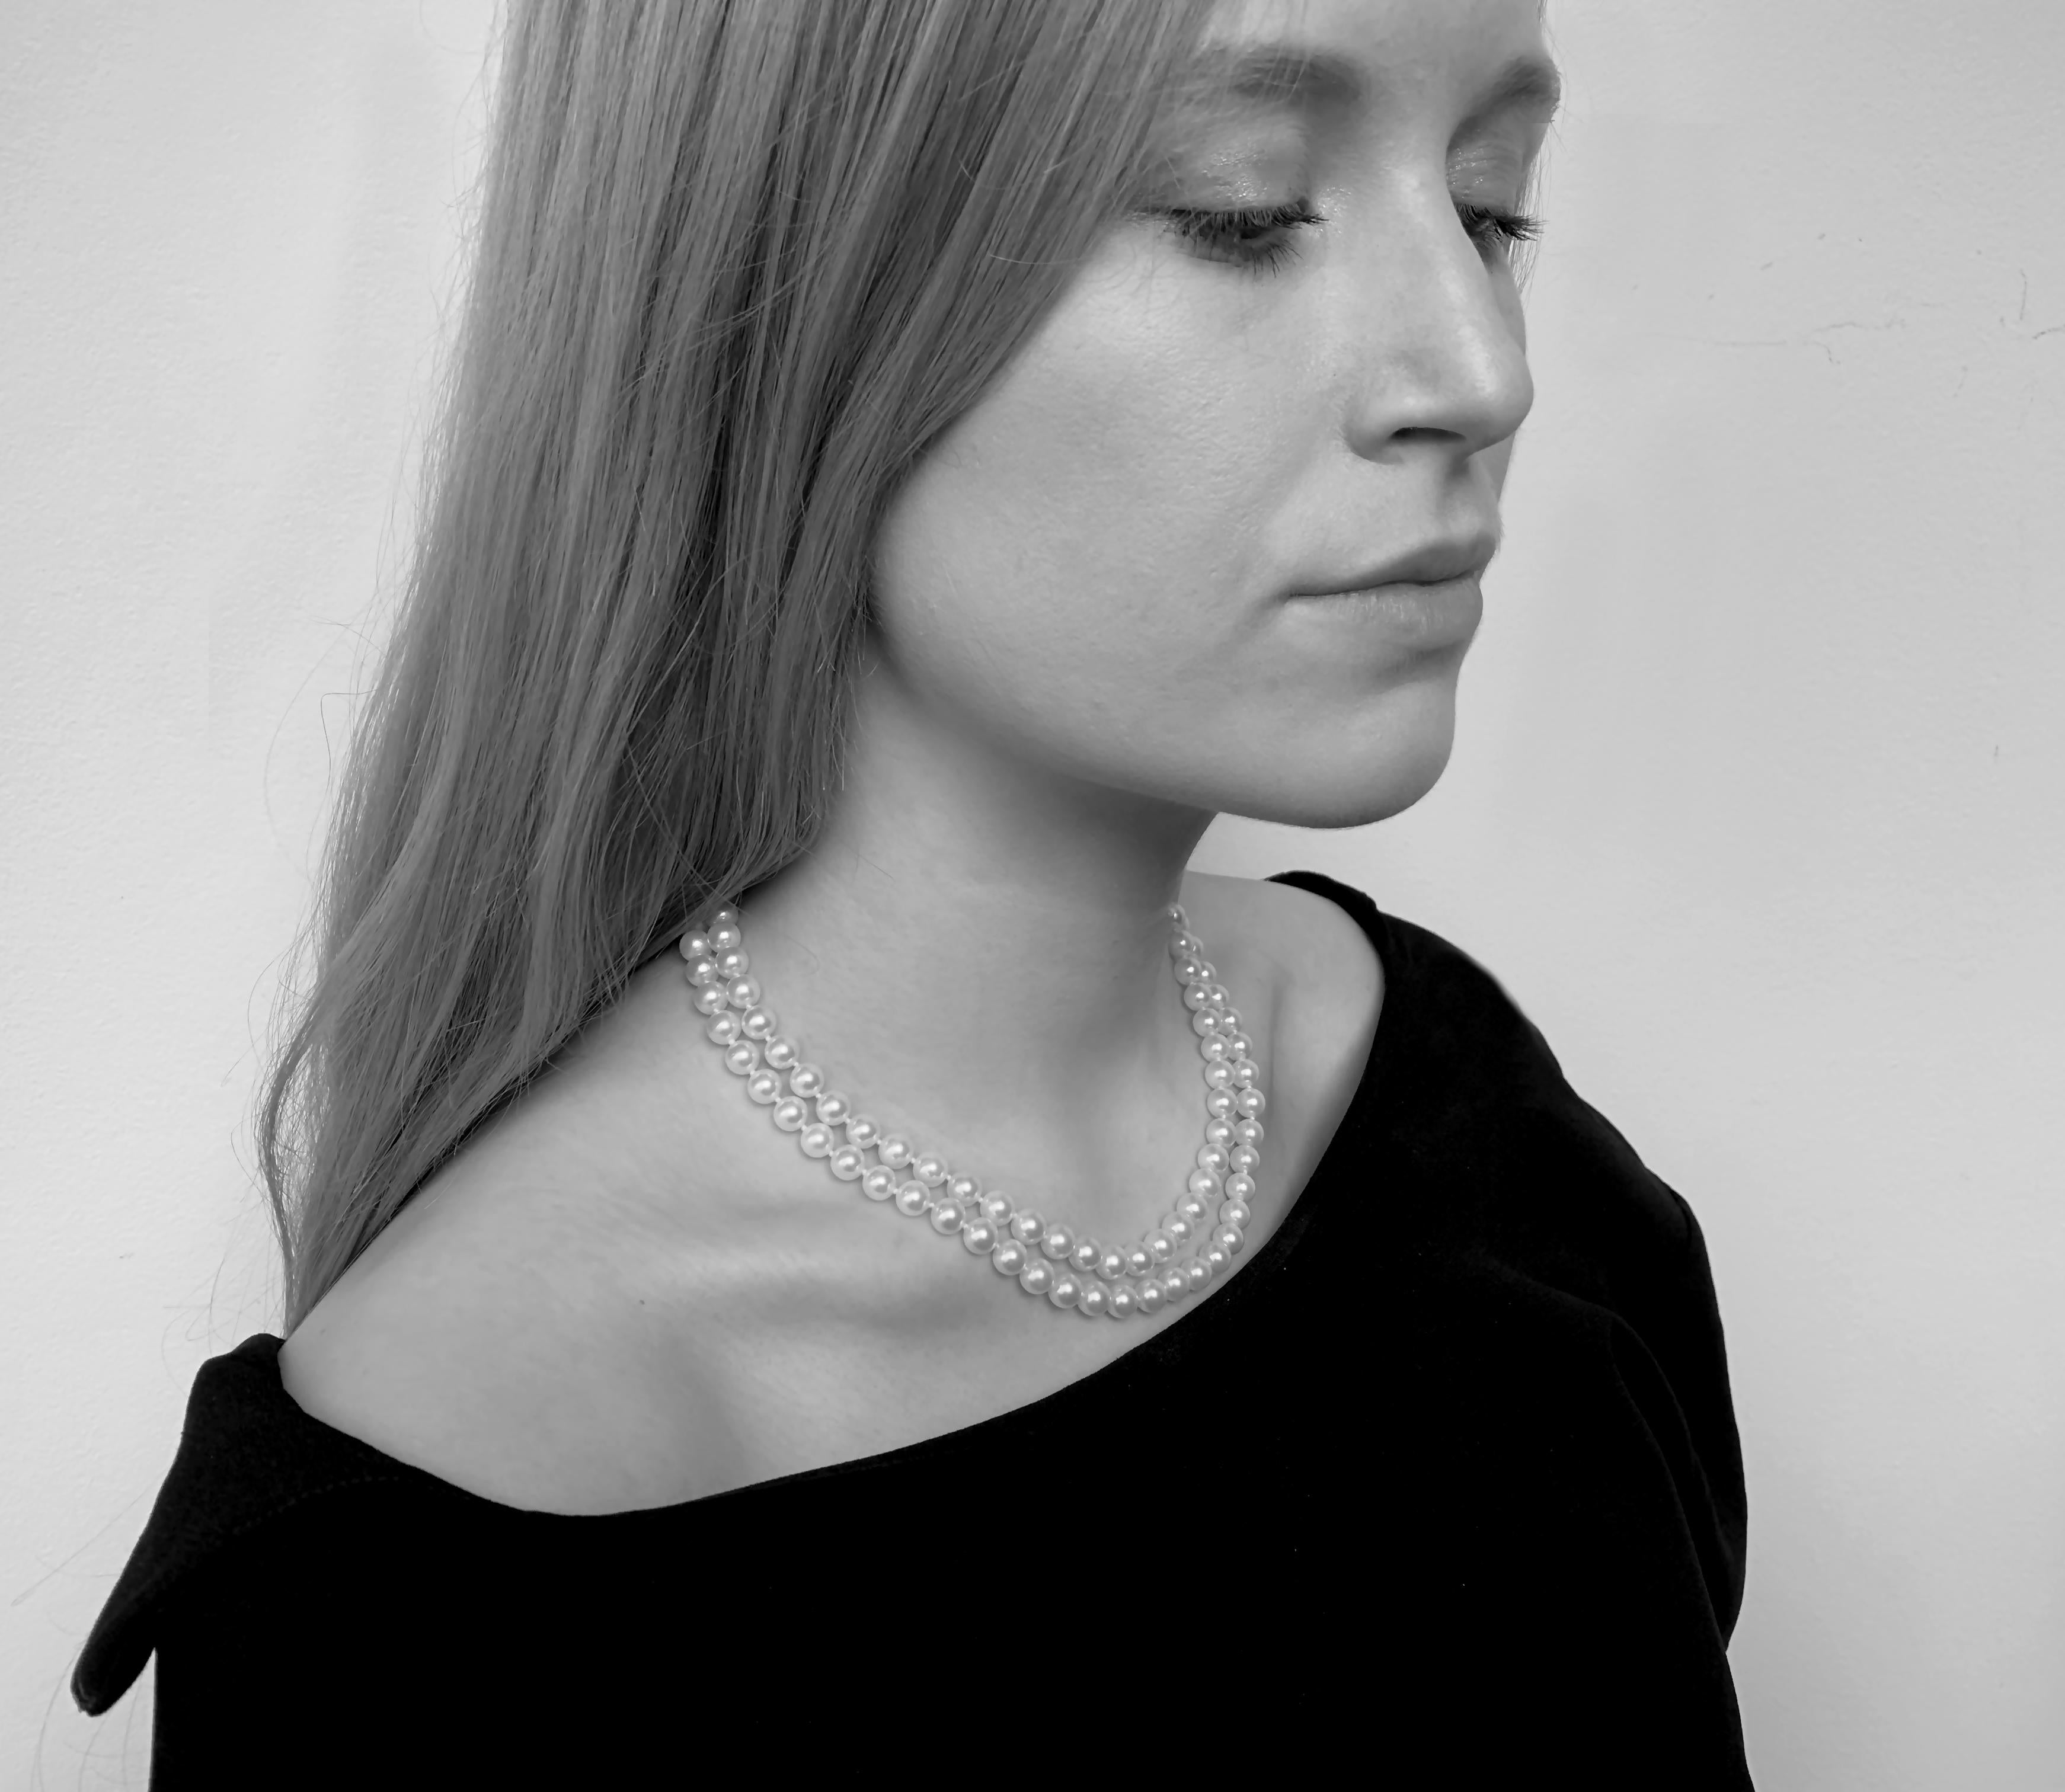 This timeless necklace by Yoko London features two rows of perfectly matched Akoya pearls, completed with an elegant 18 Karat White Gold and diamond clasp. Expertly hand-strung in our London atelier, this necklace has been flawlessly executed to